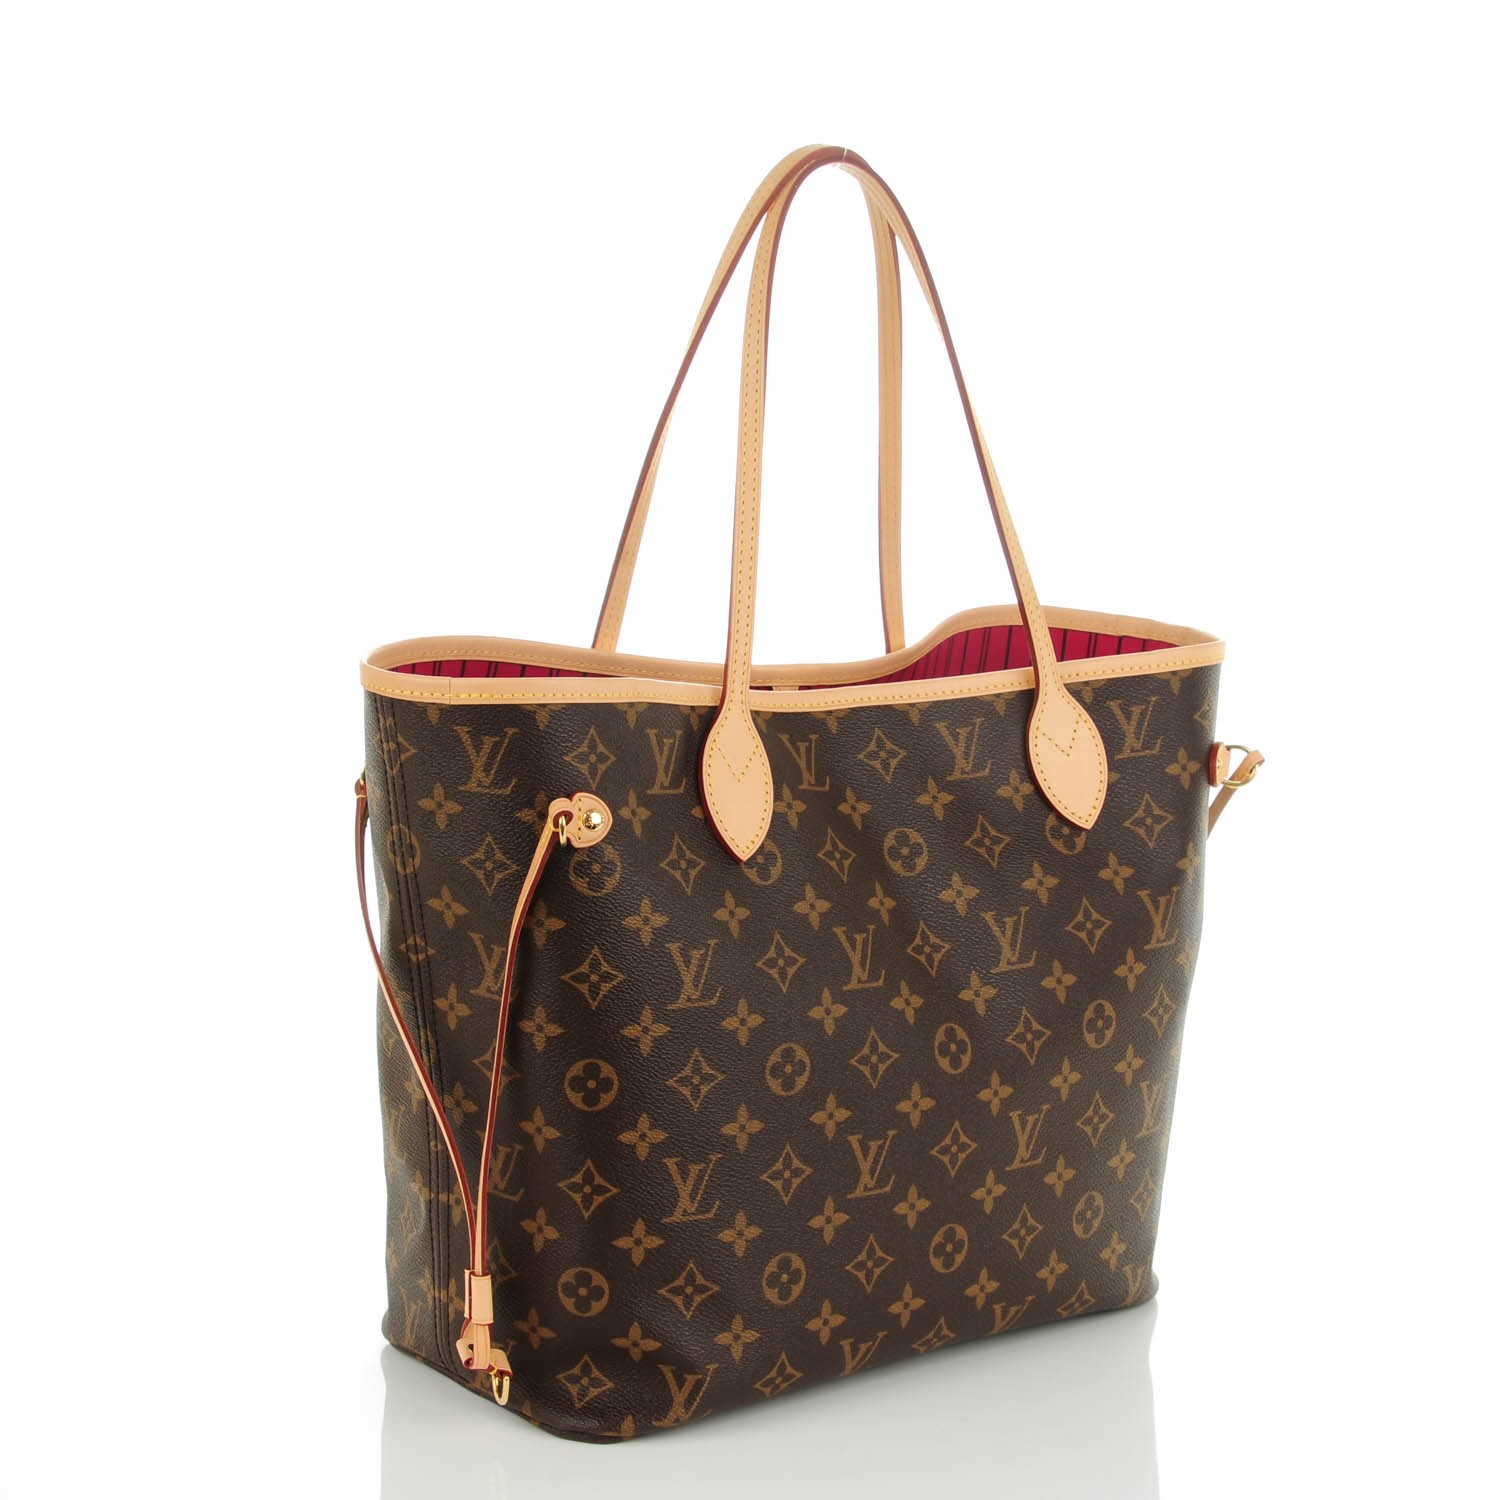 LOUIS VUITTON Neverfull Try-on + Graceful MM Reveal